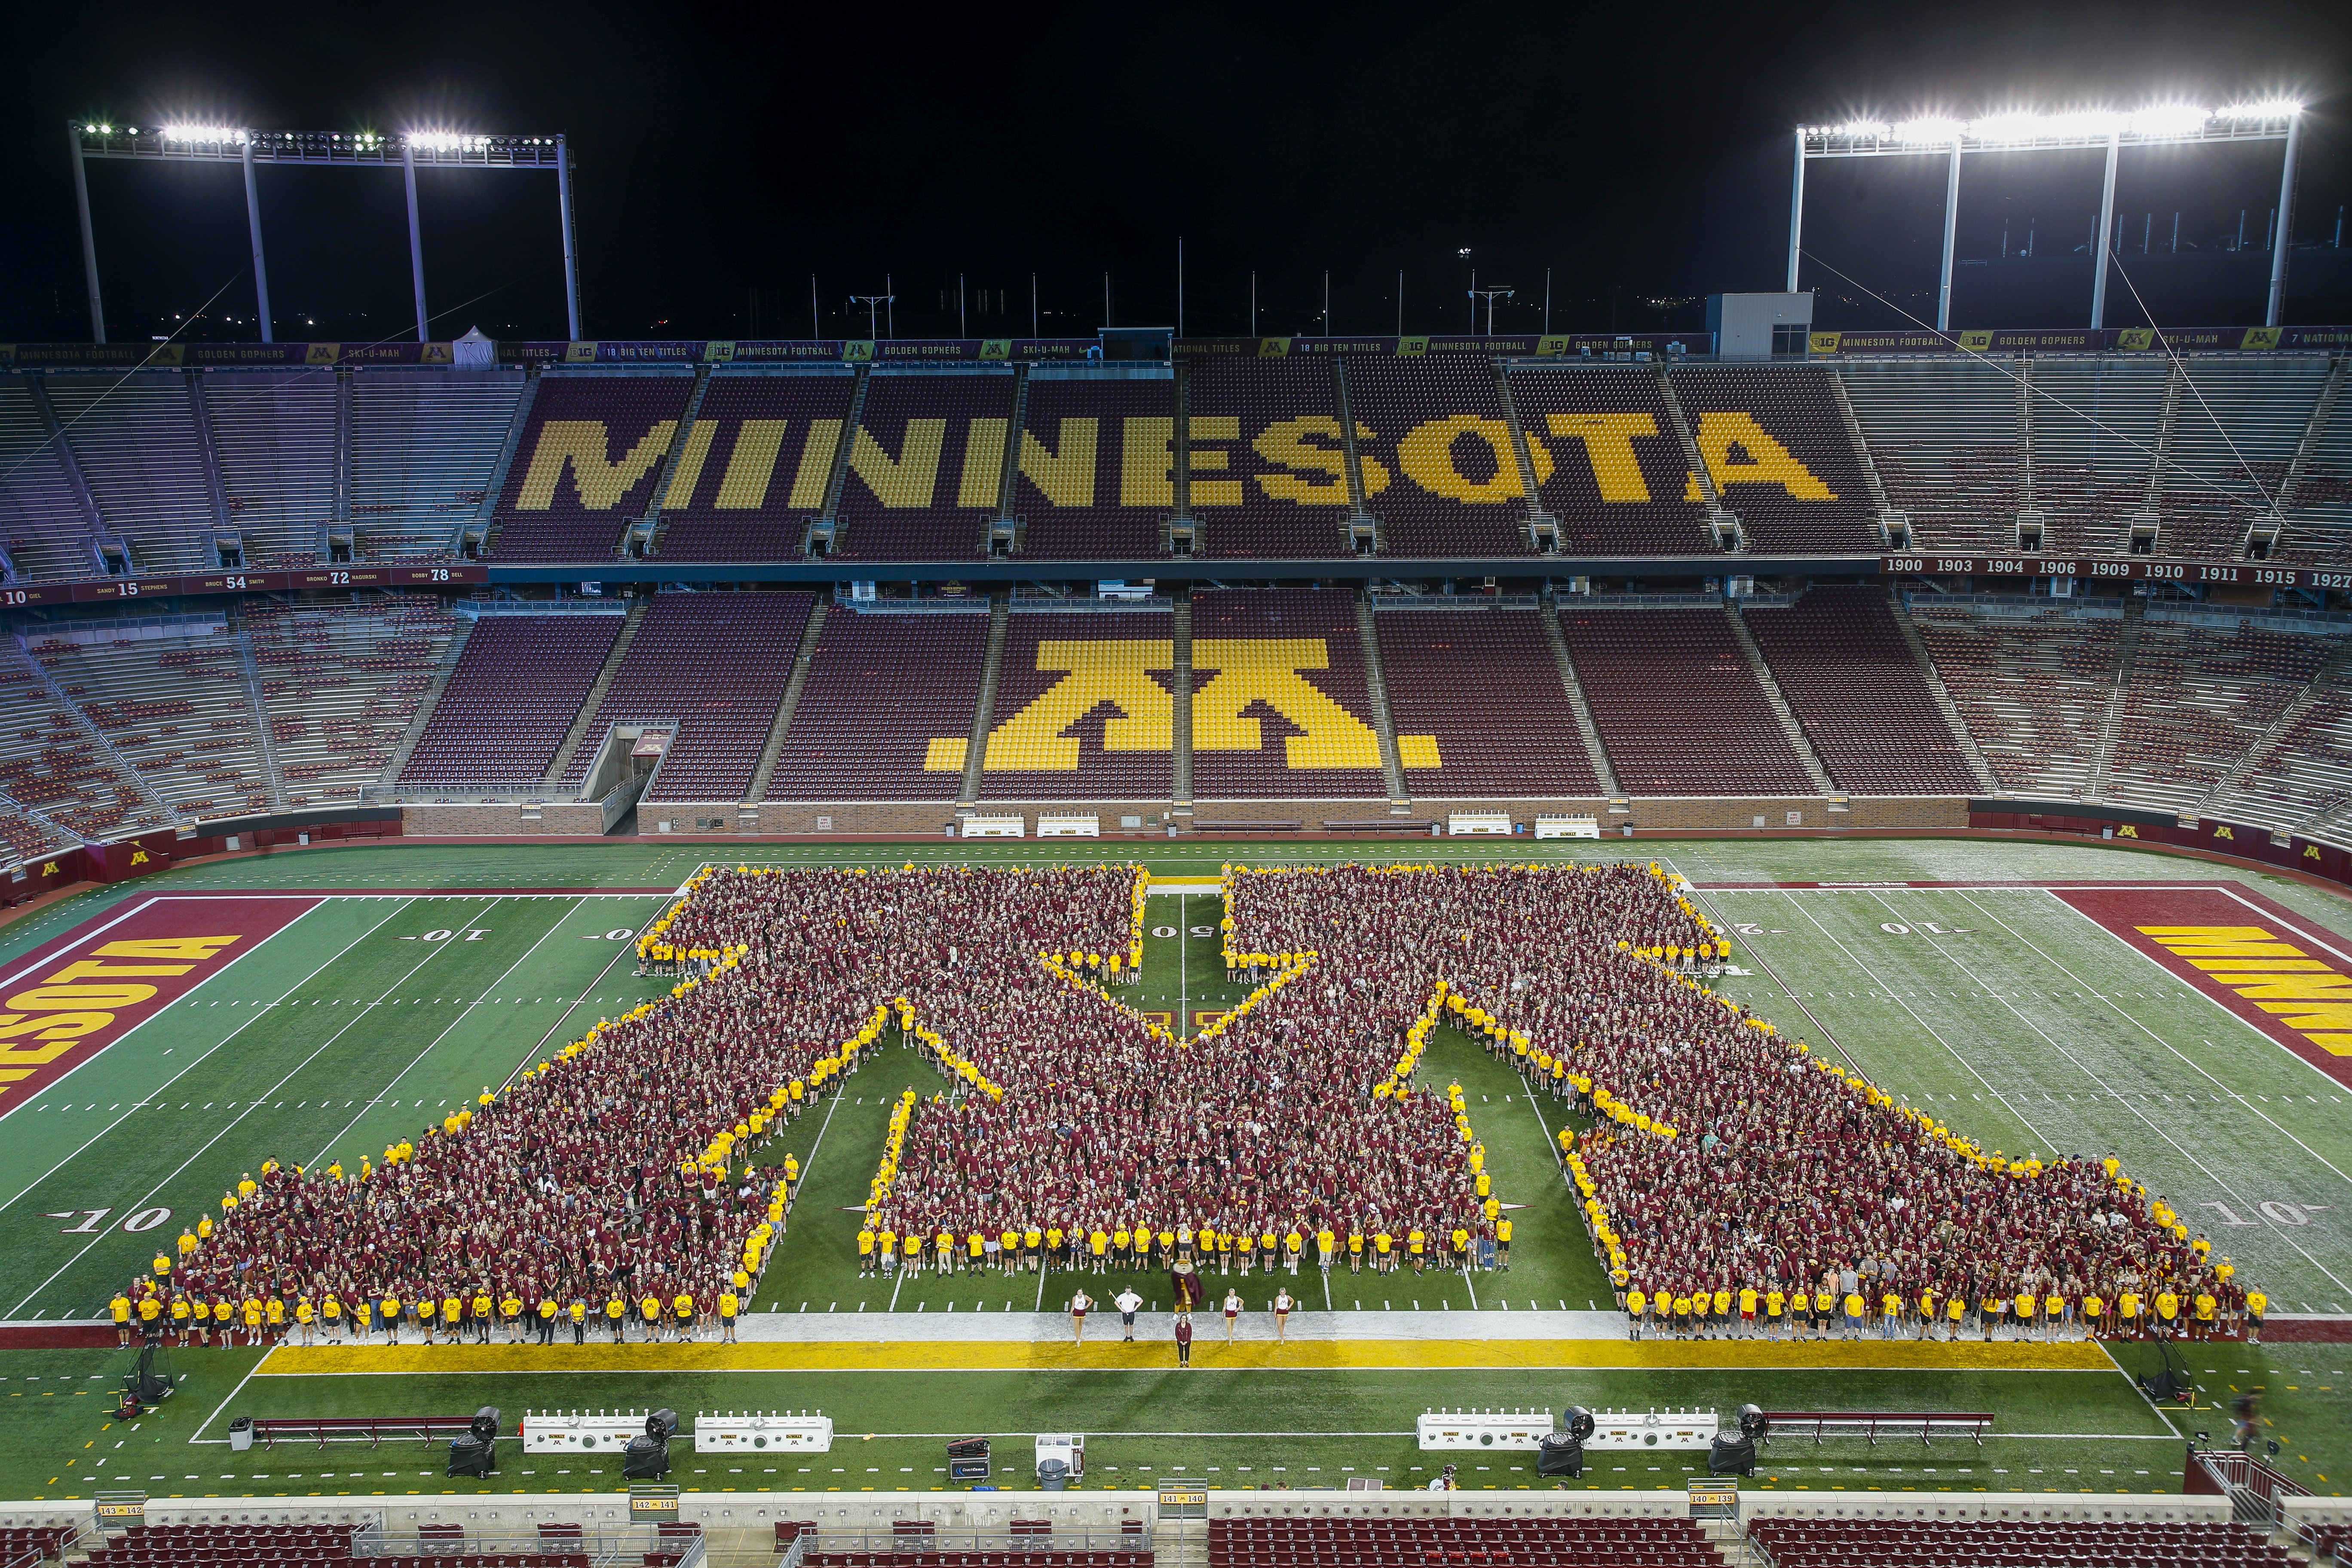 Students forming the letter M on the stadium field